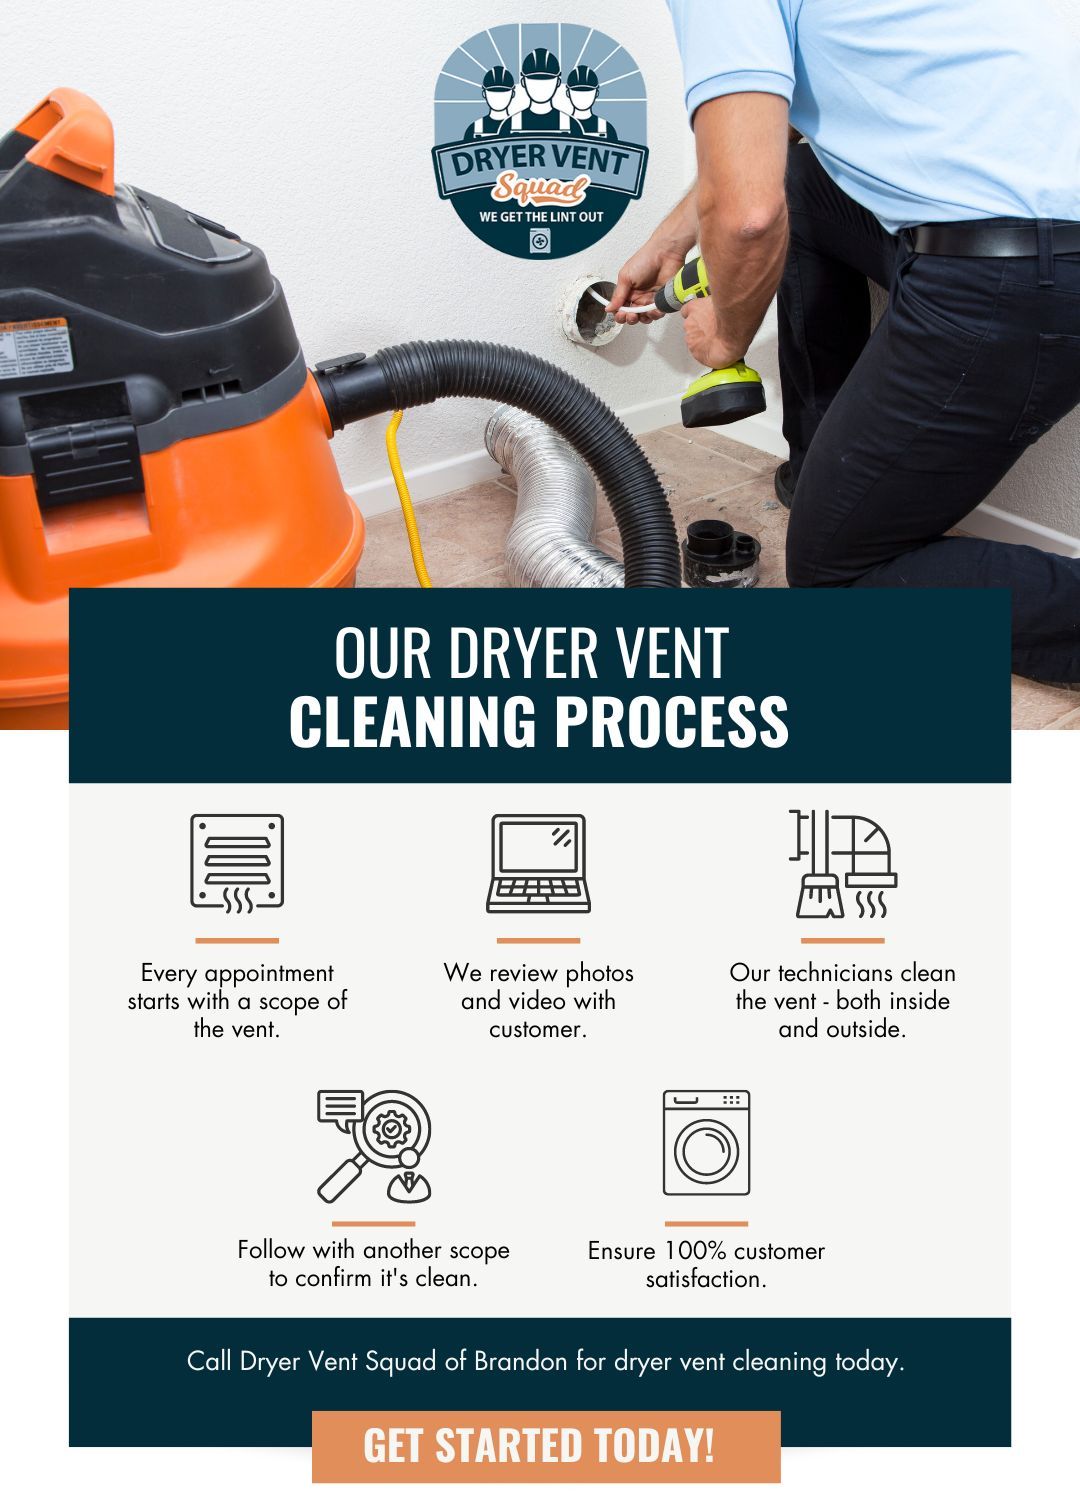 M45189 - Dryer Vent Squad of Brandon Infographic Our Dryer Vent Cleaning Process.jpg